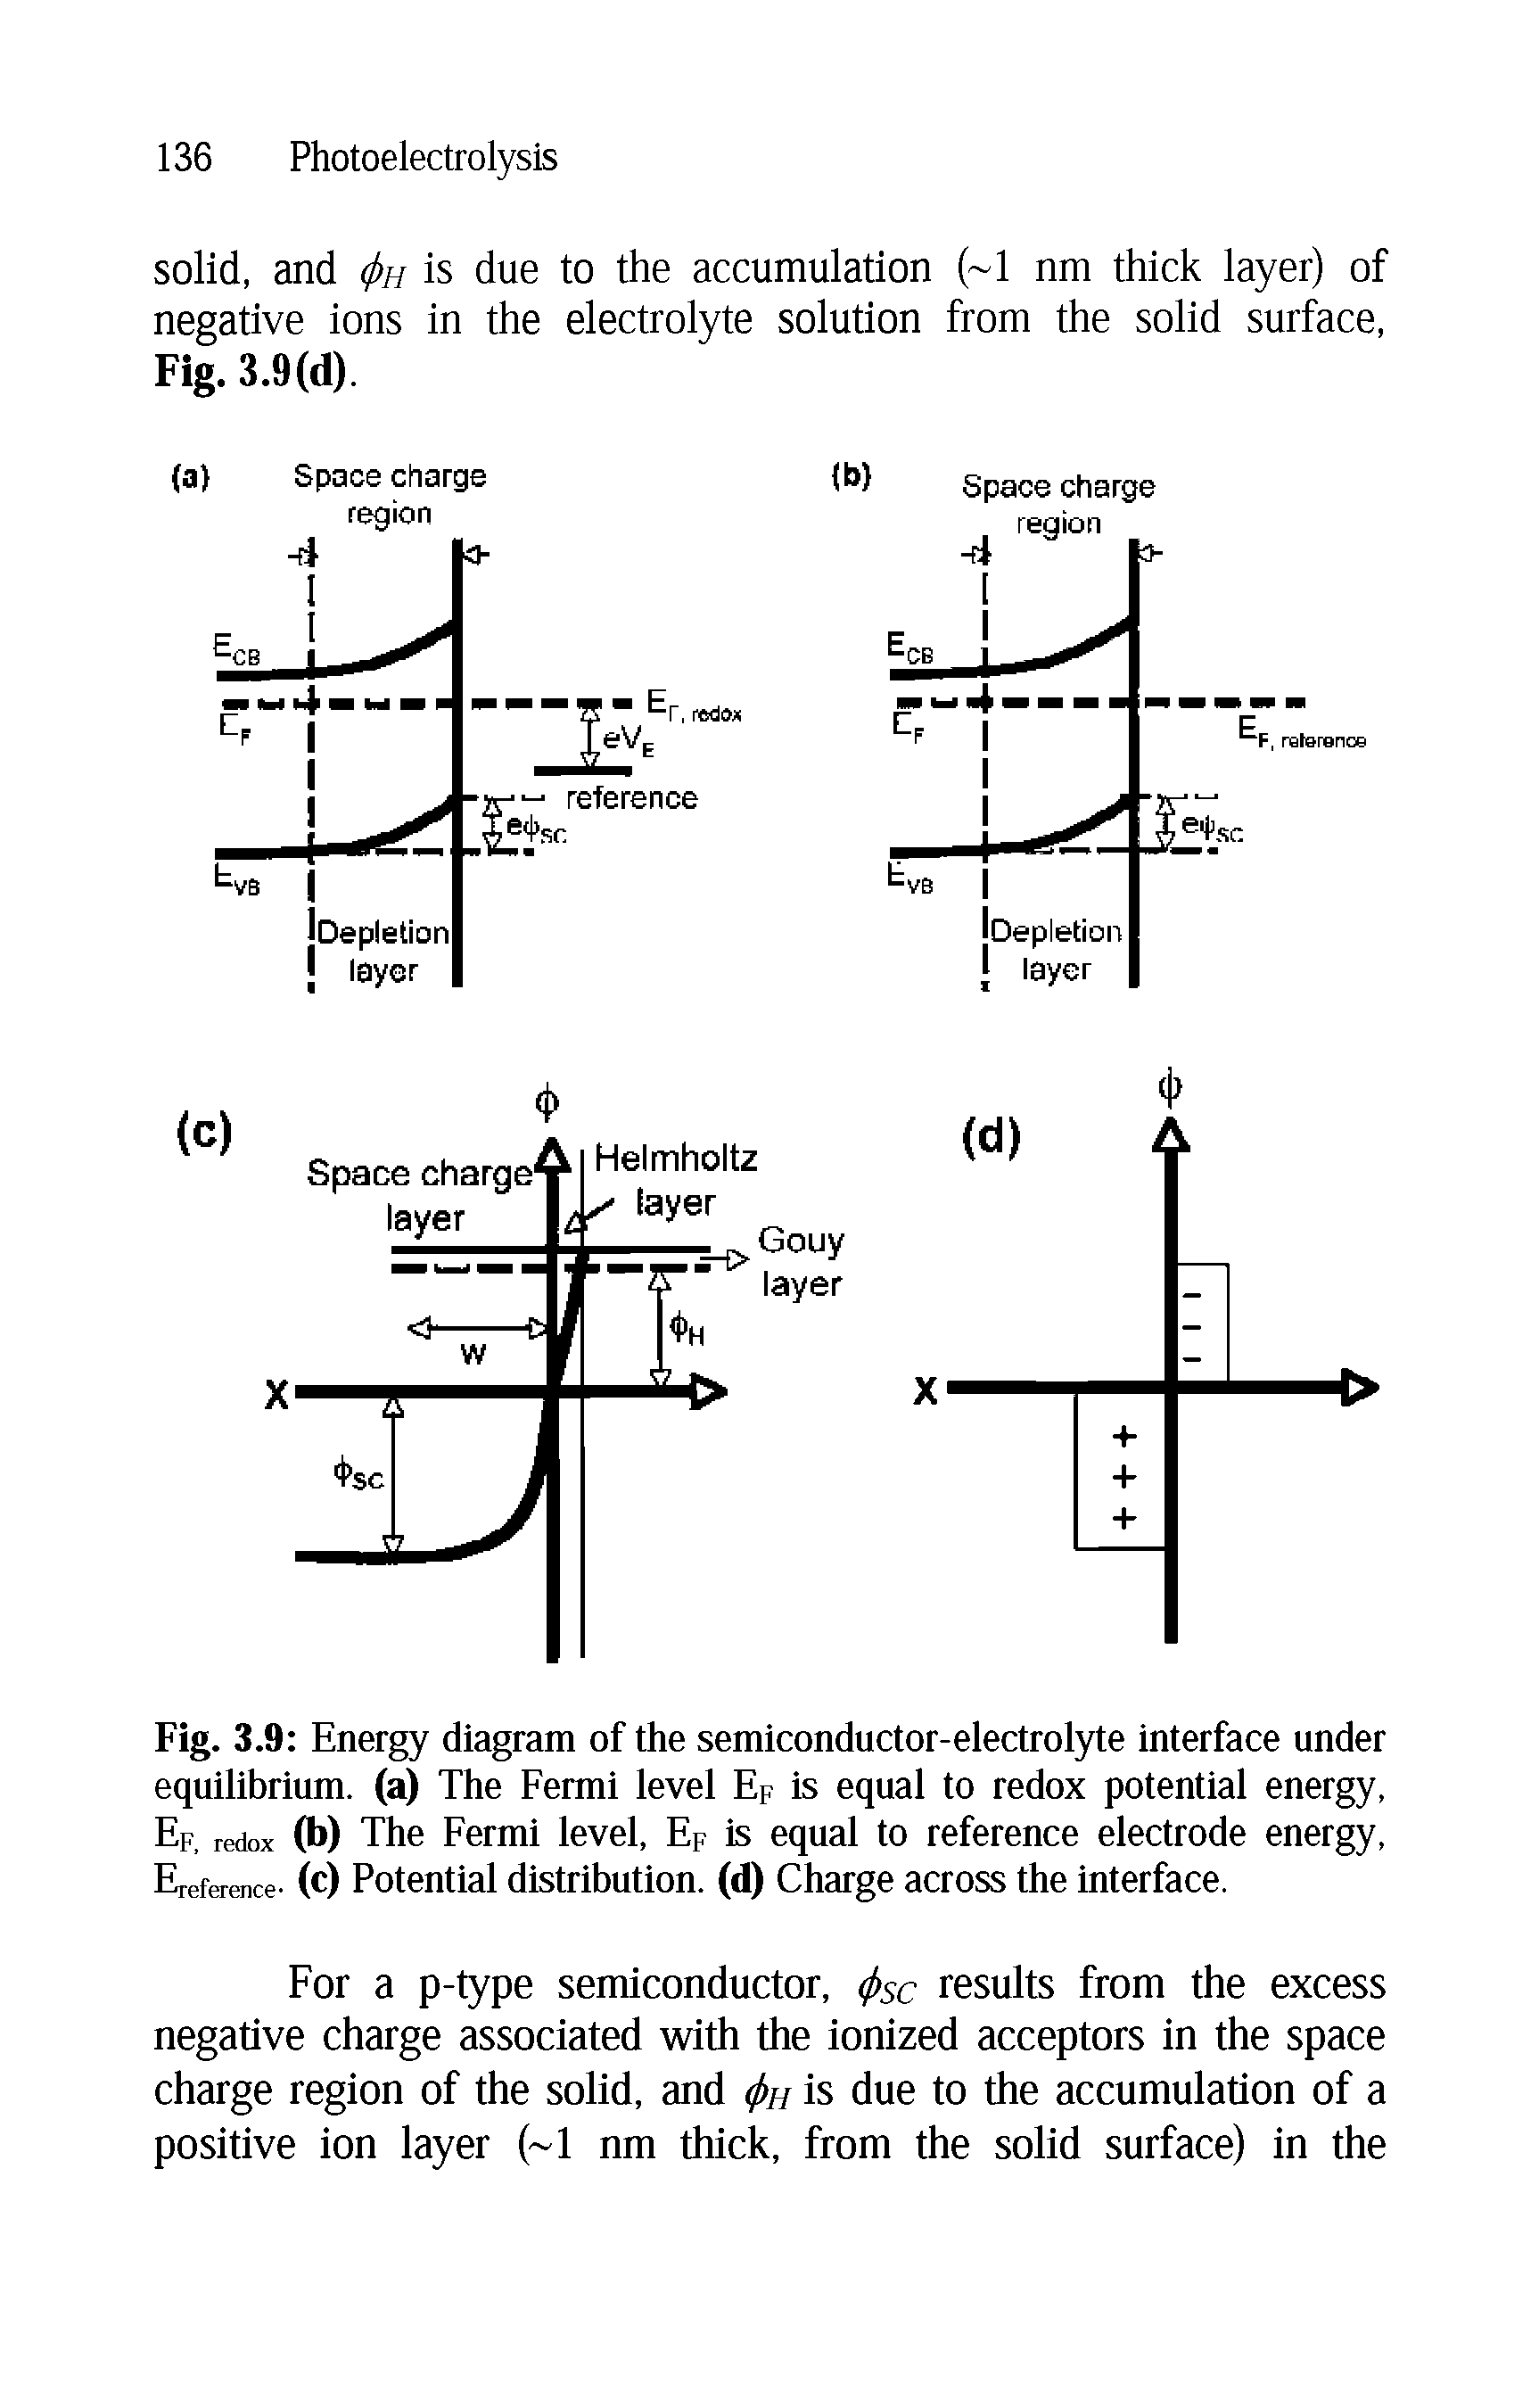 Fig. 3.9 Energy diagram of the semiconductor-electrolyte interface under equilibrium, (a) The Fermi level Ep is equal to redox potential energy, Ep, redox (b) The Fermi level, Ep is equal to reference electrode energy, Ereference- (c) Potential disMbution. (d) Charge across the interface.